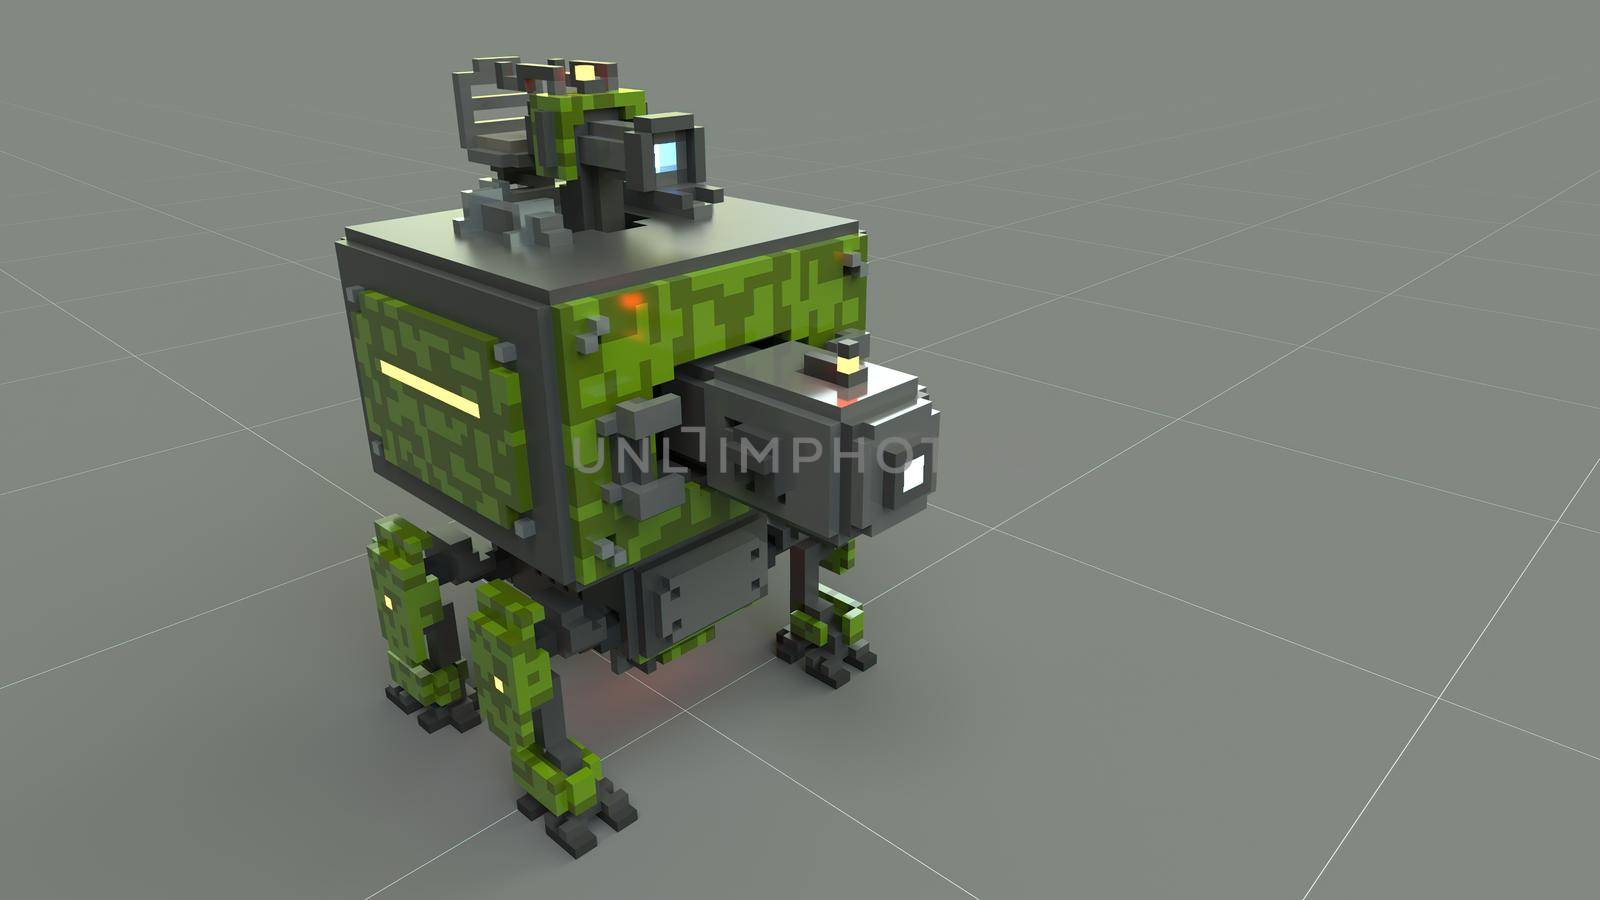 3d illustration of robot made in voxel art style 